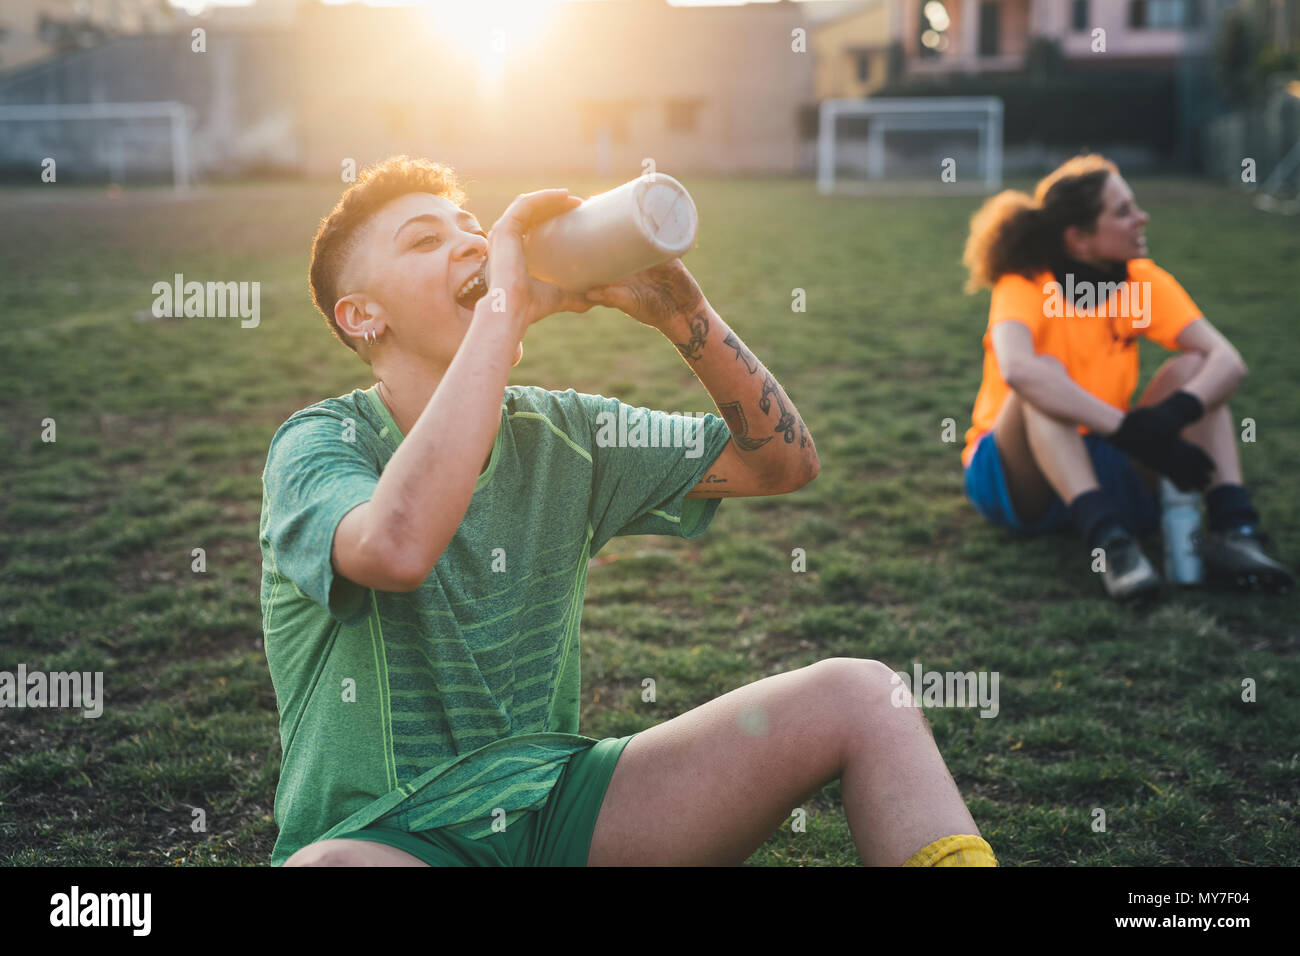 Football players taking break on pitch Stock Photo